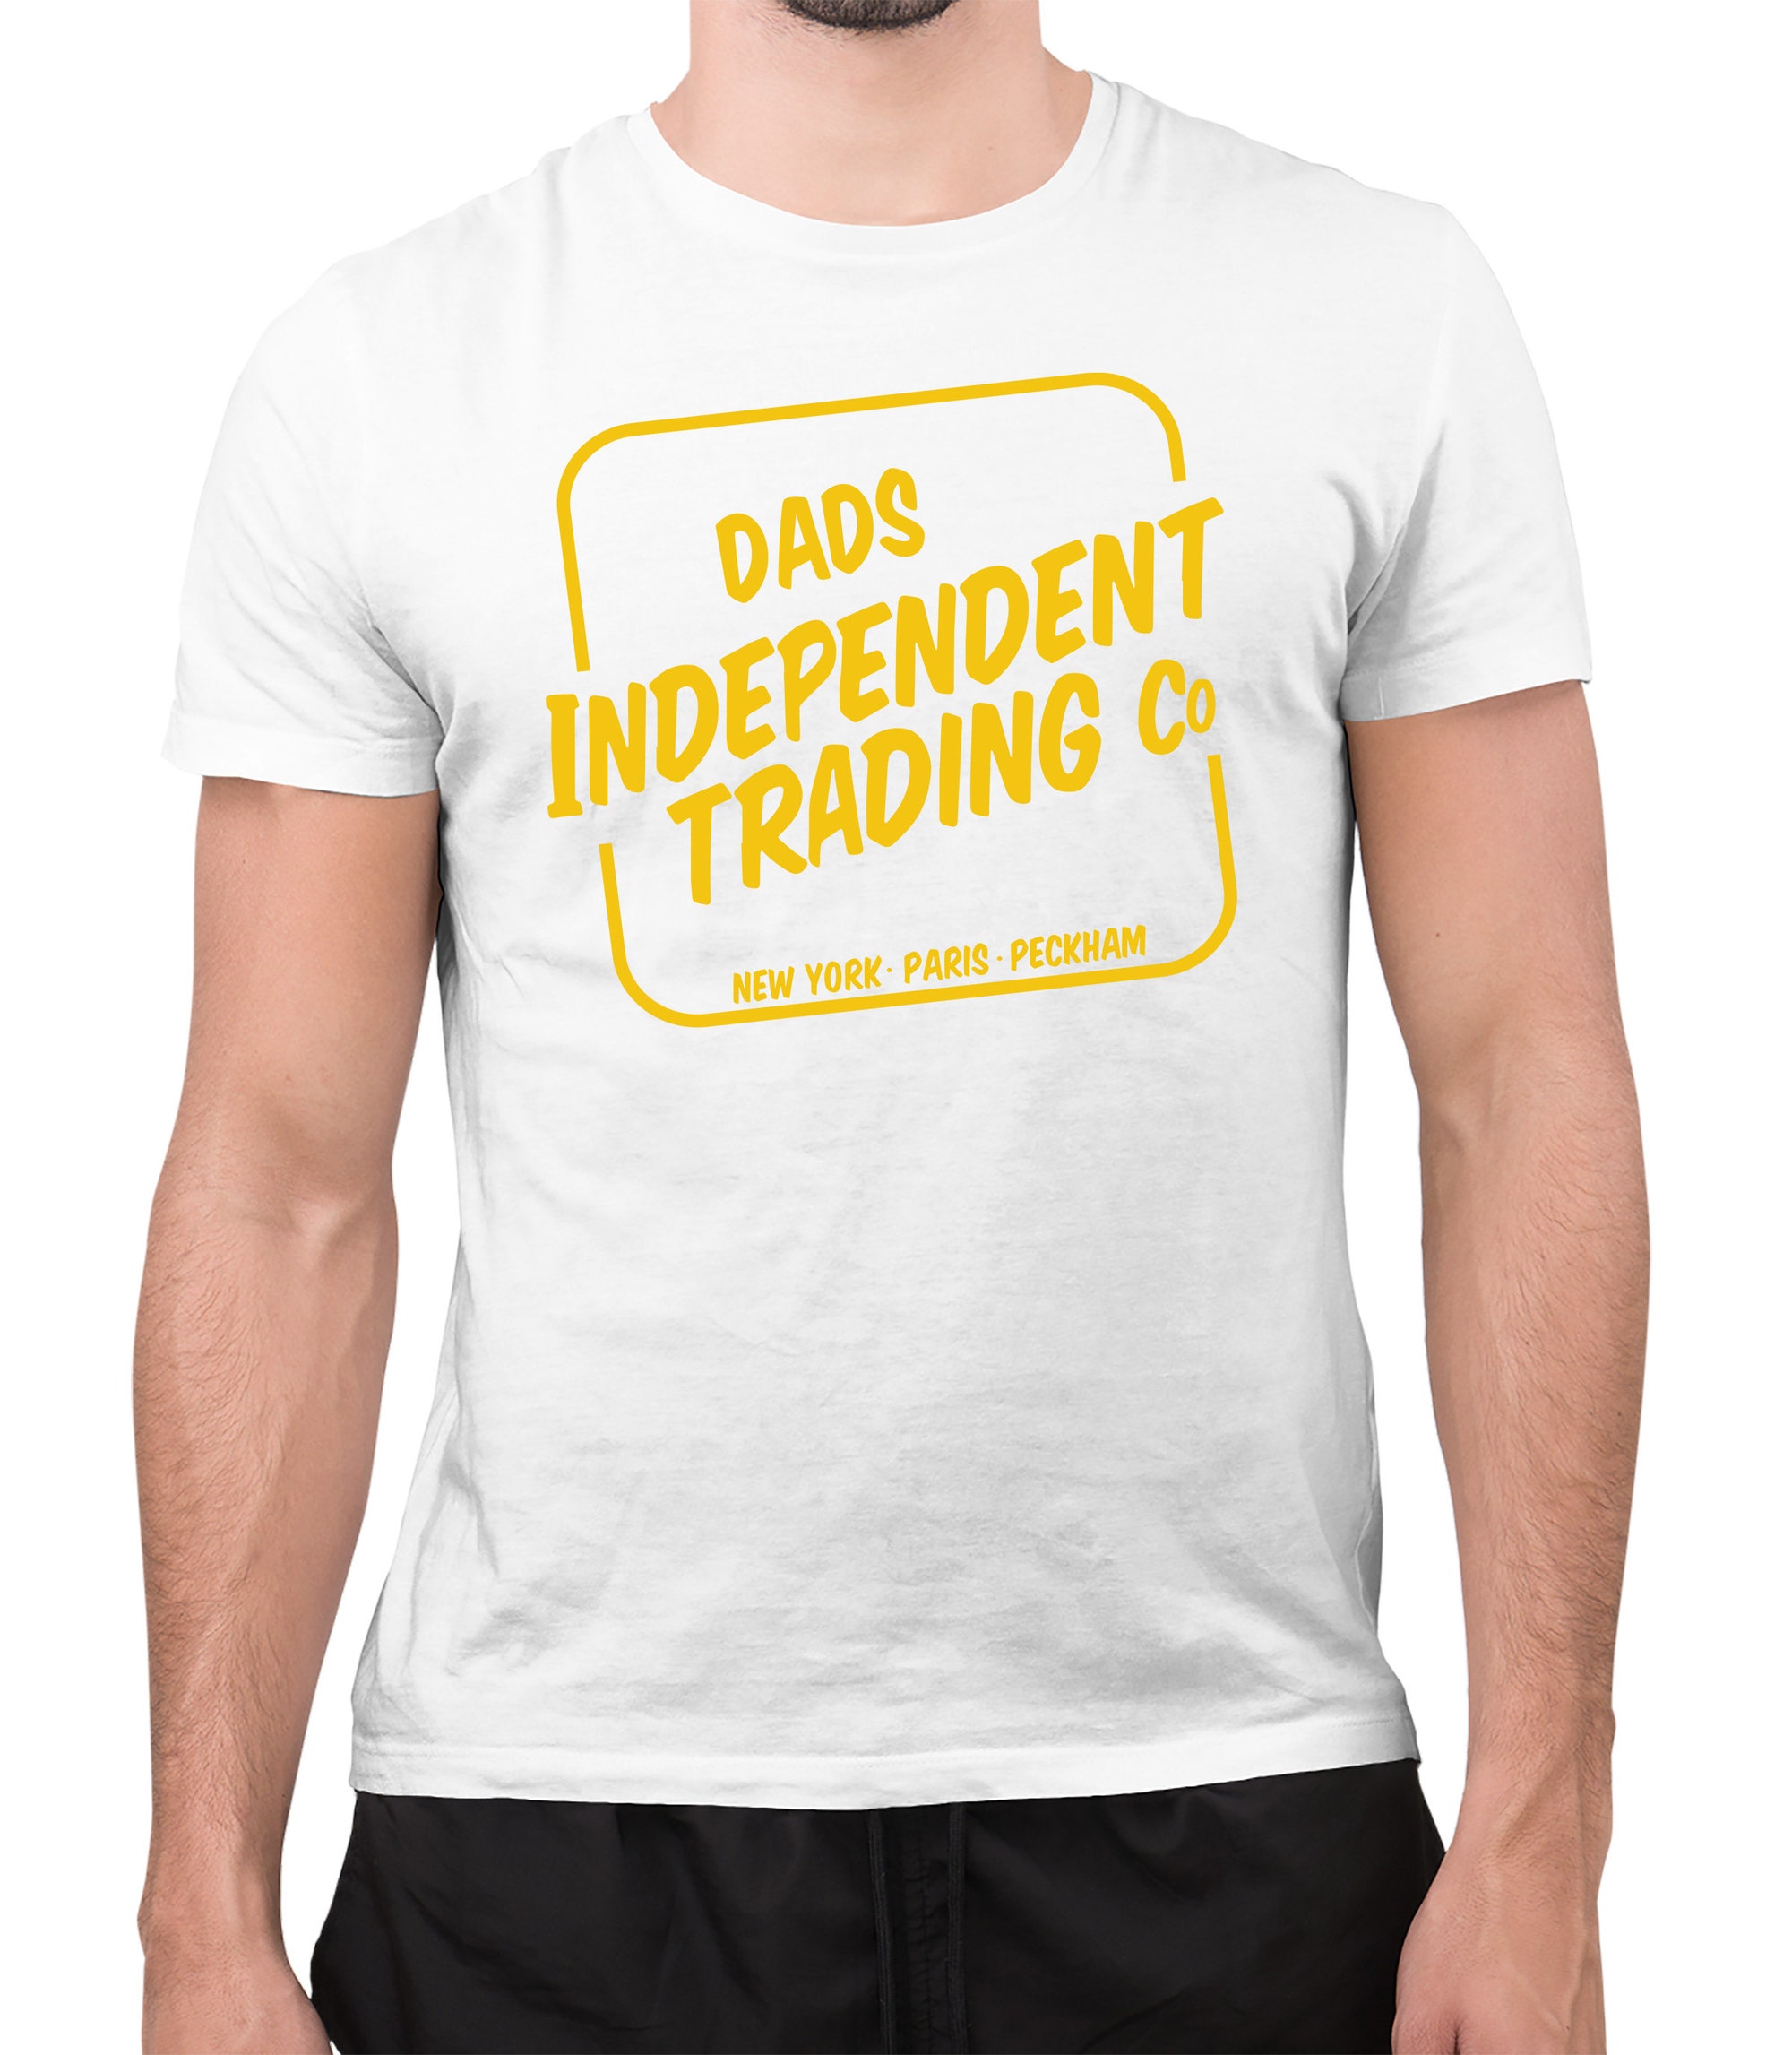 Dads Independent trading fools Fathers Day Tee T-shirt